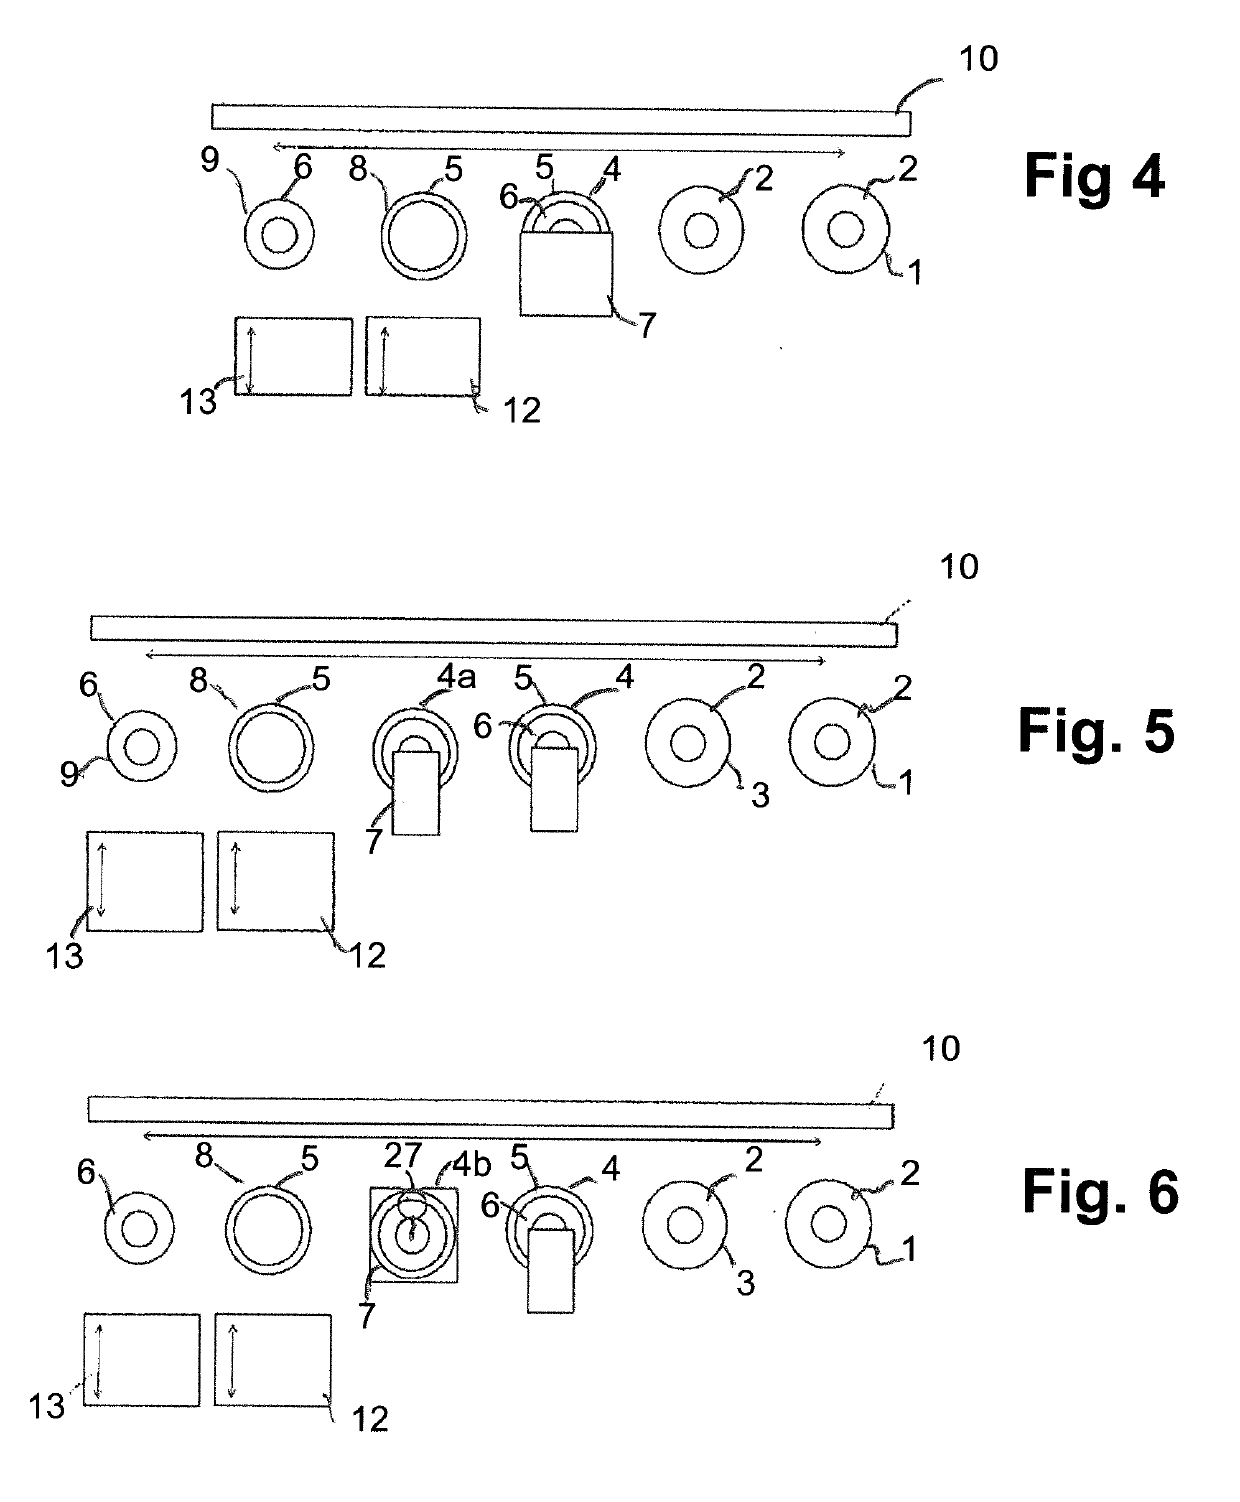 Method for Producing Lamination Stacks and Facility for Performing the Method